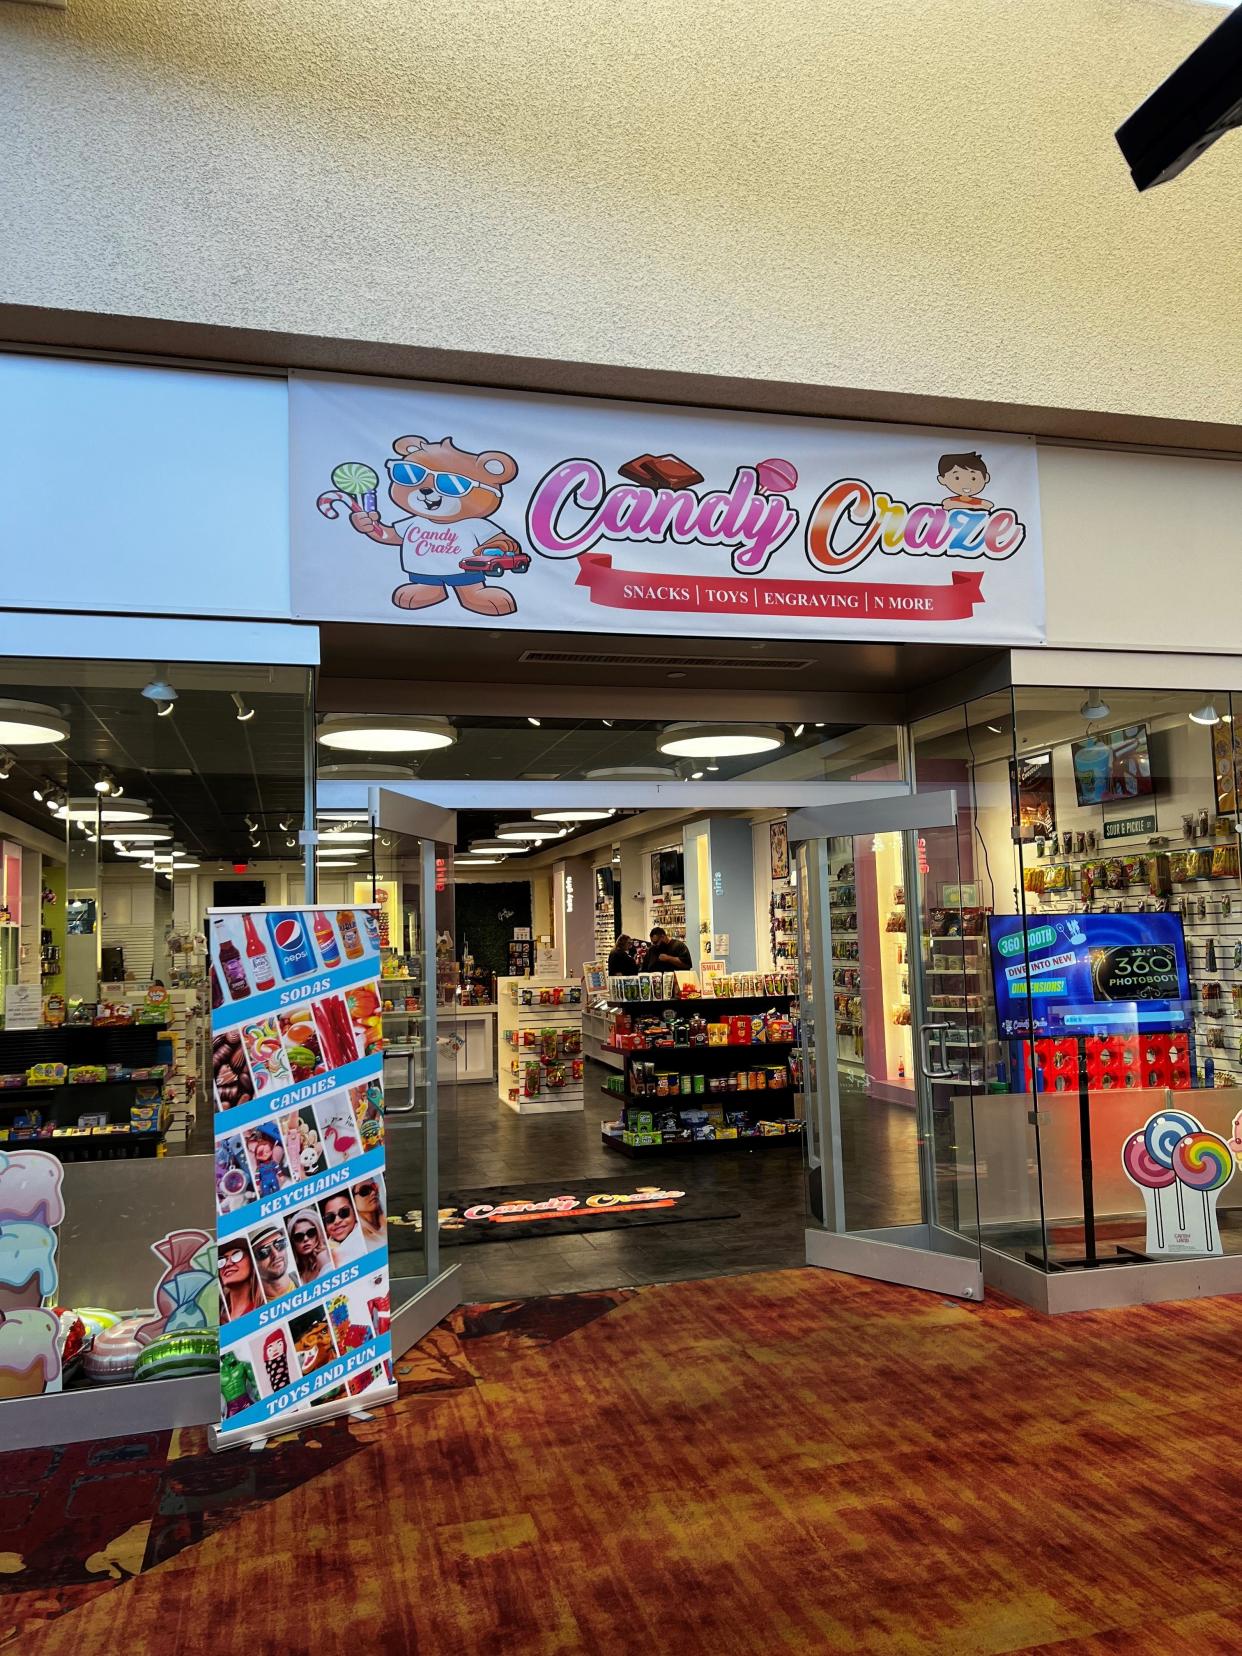 Candy Craze N More had its opening day on Friday in the Sunset Mall.